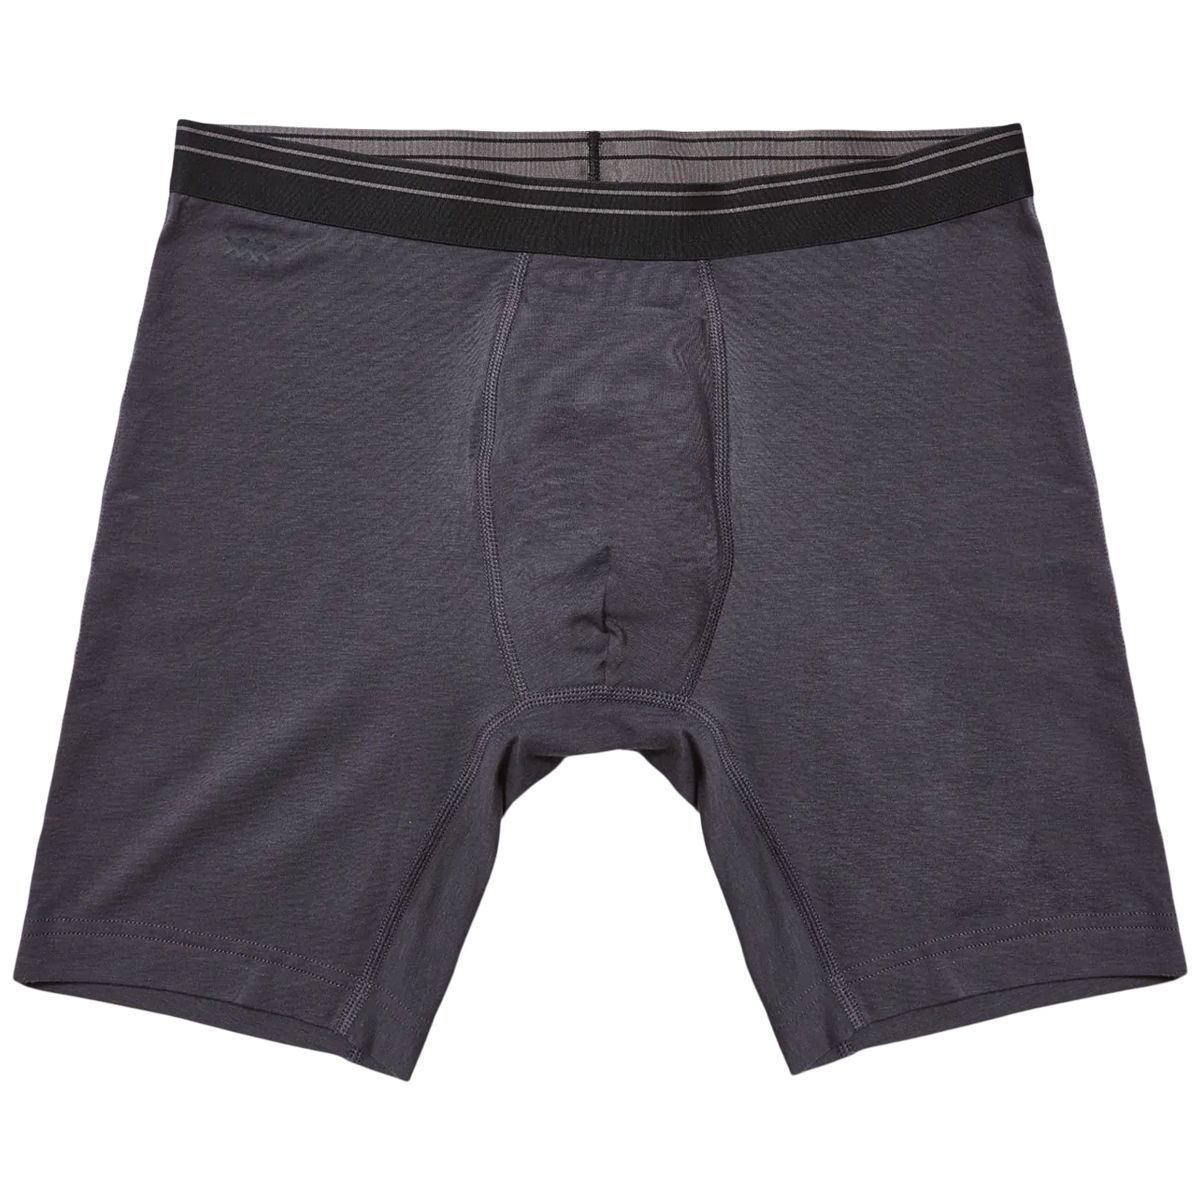 The 18 Best Boxer Briefs for Men in 2023